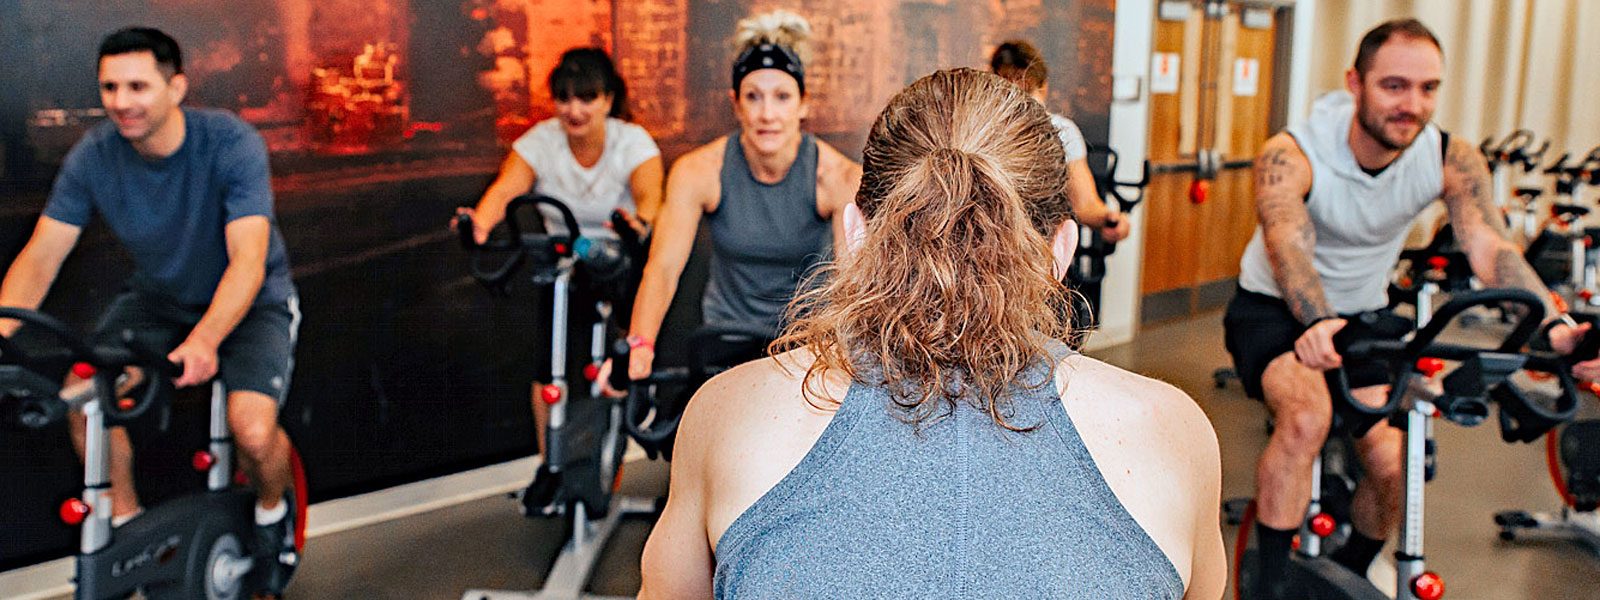 Spin class designed for corporate fitness in a corporate wellness program.